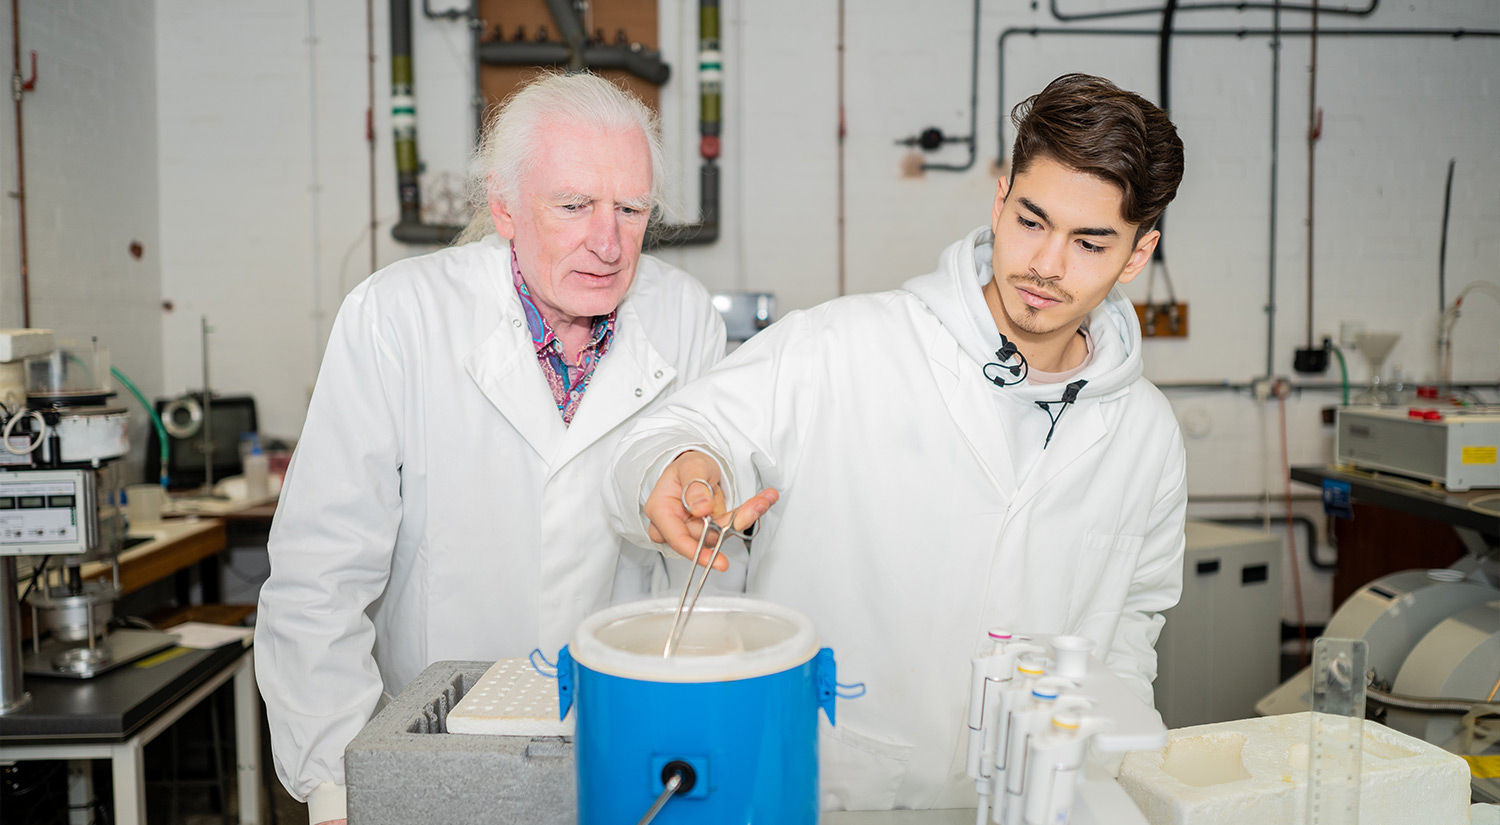 A student and a member of staff use liquid nitrogen in a lab